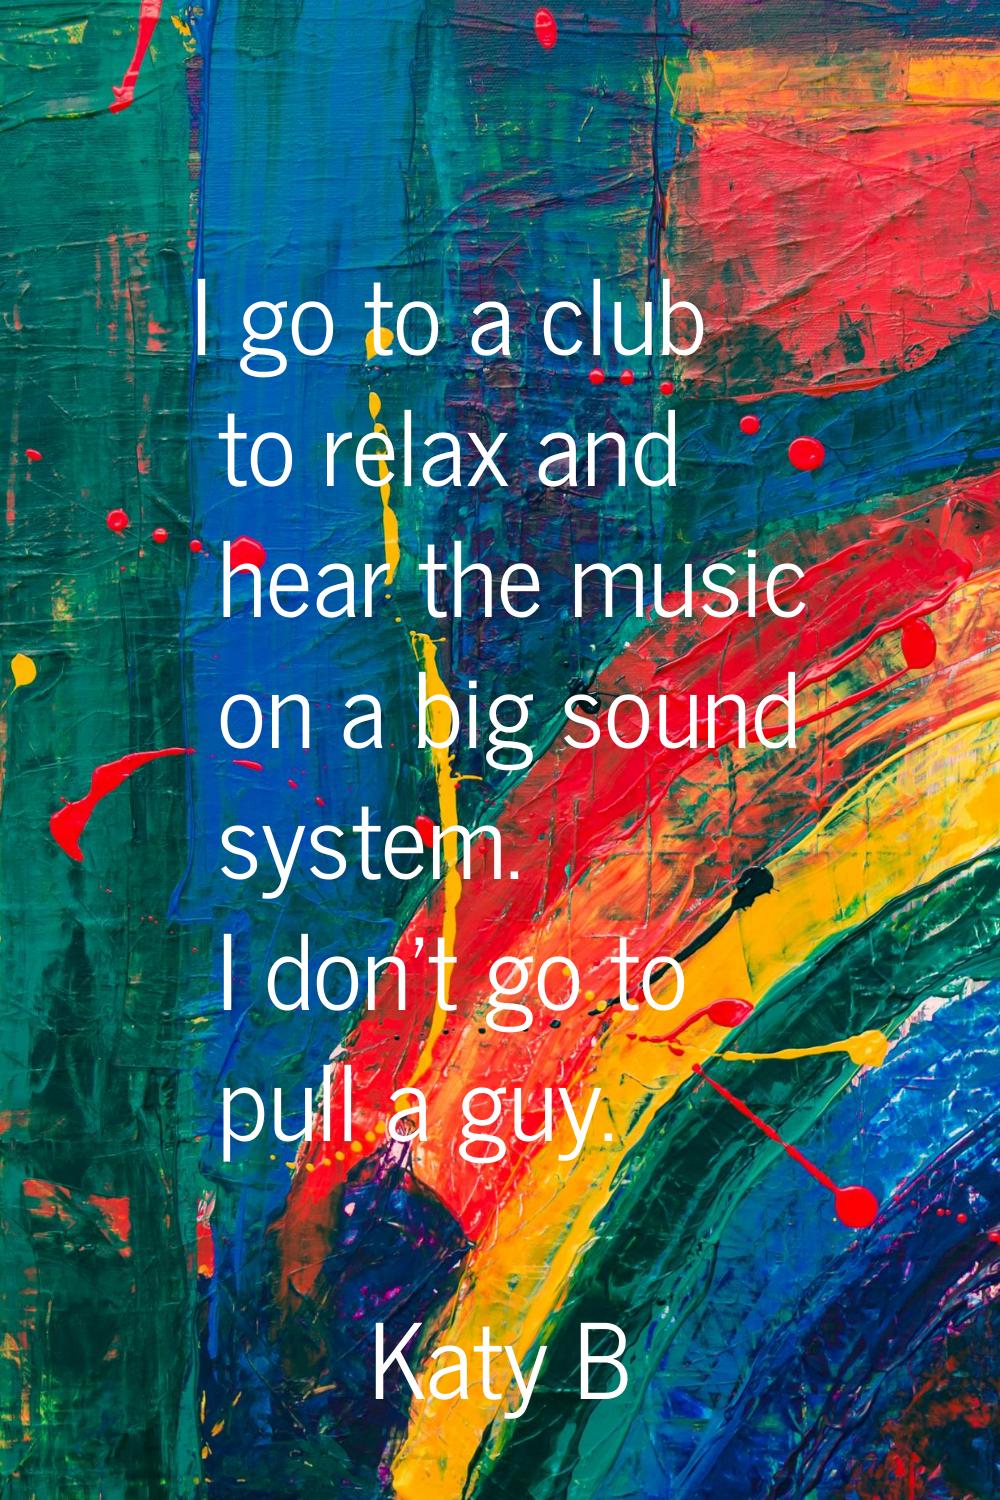 I go to a club to relax and hear the music on a big sound system. I don't go to pull a guy.